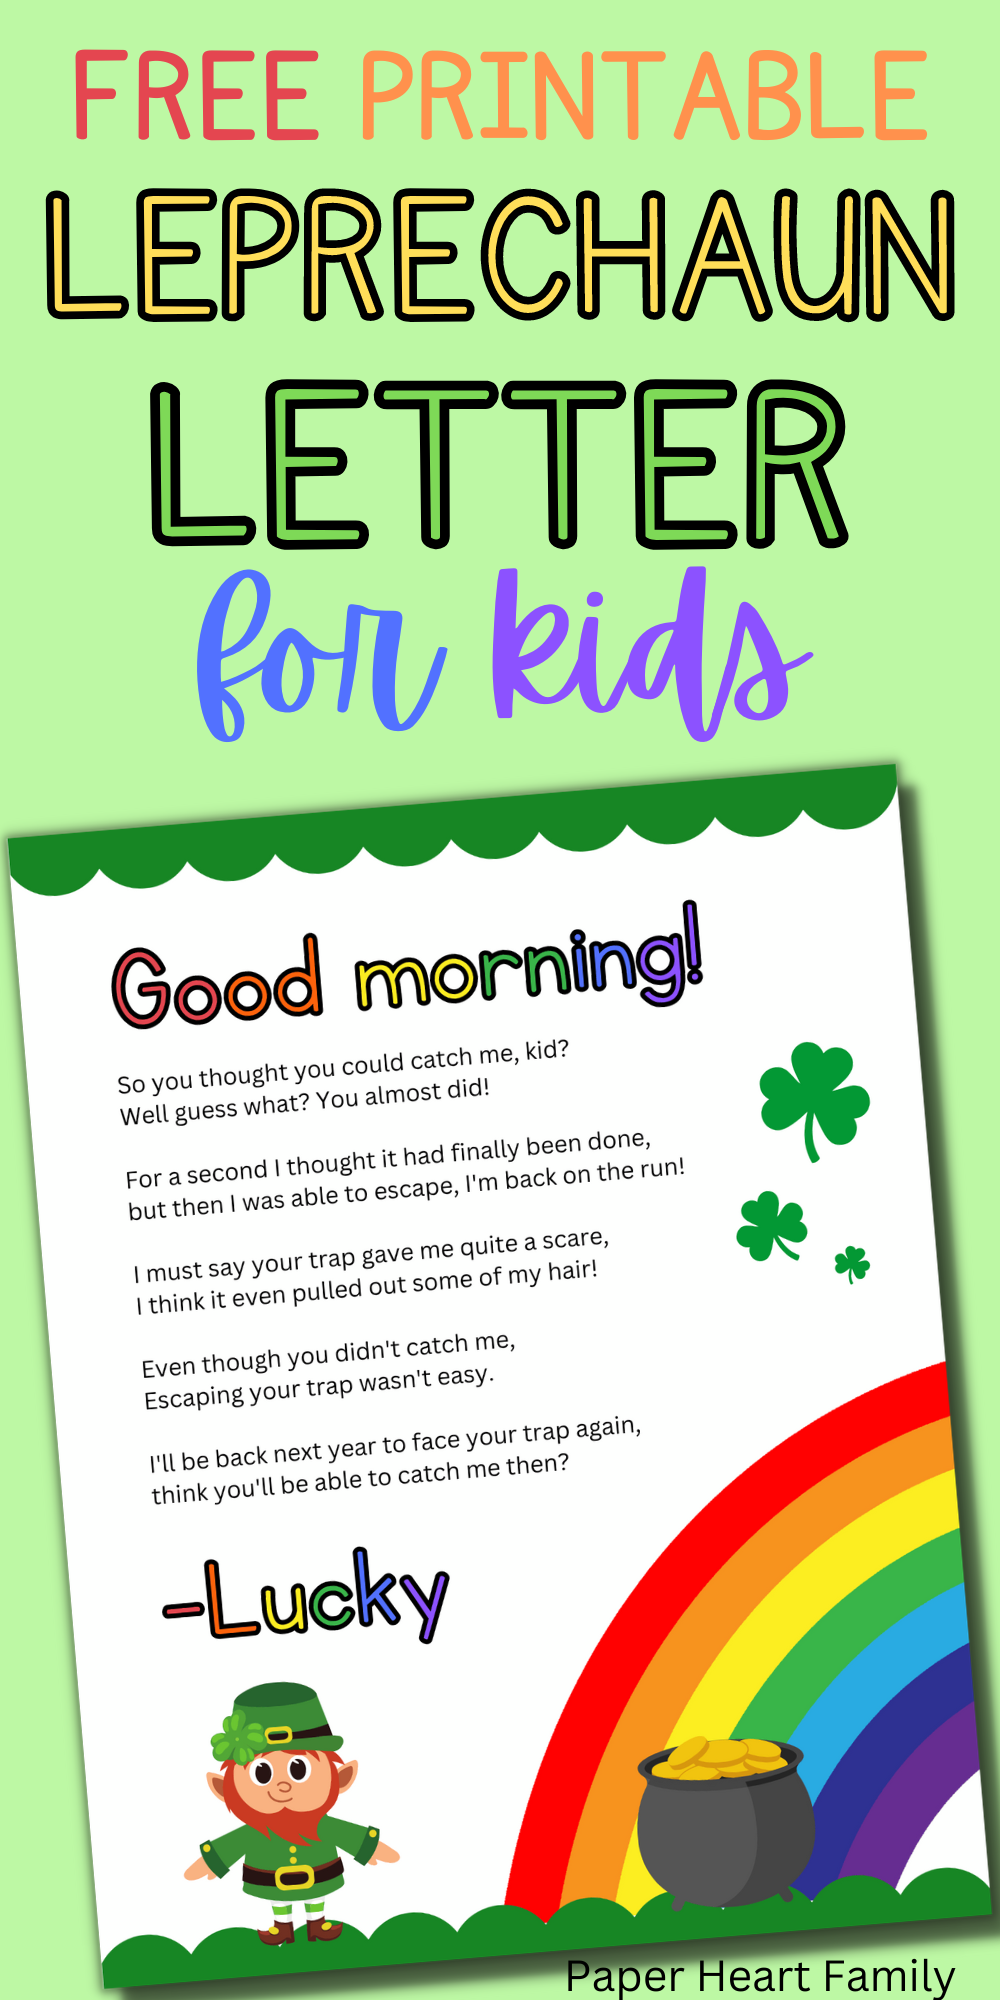 Free Printable Leprechaun Letter To Child Letters For Kids St Patrick s Day Traditions St Patrick Day Activities